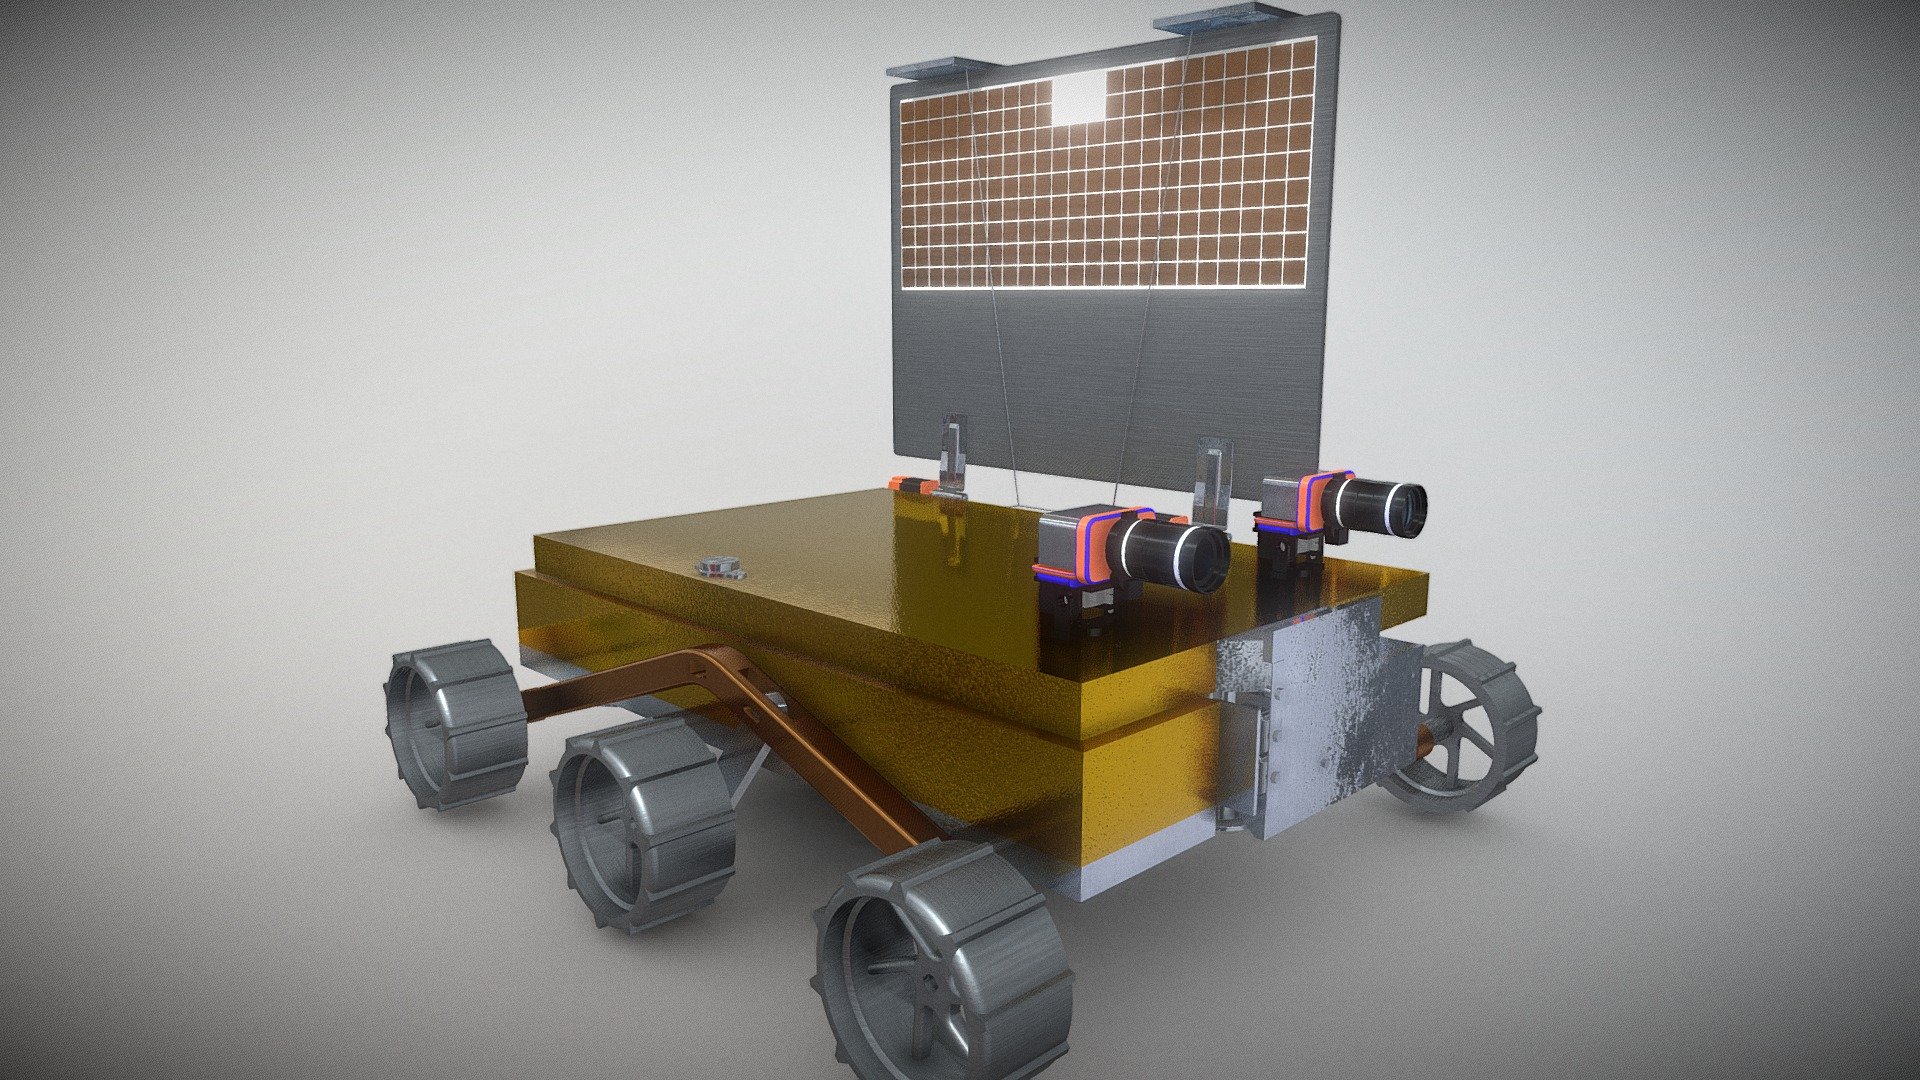 This an Engineering Model of Pragyan Rover with minute &amp; technically accurate details.

1k textures

All PBR Materials

All technical annotations included

On Demand files format: 
1.STEP 
2.STL

YouTube video for all information related to rover https://youtu.be/4UjFH2q9Z94

Pragyan  was the rover of Chandrayaan-2 and is the rover for the Chandrayaan-3 mission, two lunar missions developed by the Indian Space Research Organisation (ISRO),

Chandrayaan-2 launched on 22 July 2019. Pragyan was destroyed along with its lander, Vikram, when it crash-landed on the Moon on 6 September 2019 and never got the chance to deploy.

The launch of Chandrayaan-3 has been scheduled for July 14, 2023, at 2:35 pm IST.

Rover Parts




Stereoscopic camera

APXs X Ray

LIBS

Solar Panel

Rocker Bogie Mechanism

AX TX antenna

Motorized Hinges
://en.wikipedia.org/wiki/Pragyan_(rover)
 - Chandrayaan 3 Pragyan Rover, Indian Moon Rover - 3D model by MechLab3D (@MechLab85) 3d model